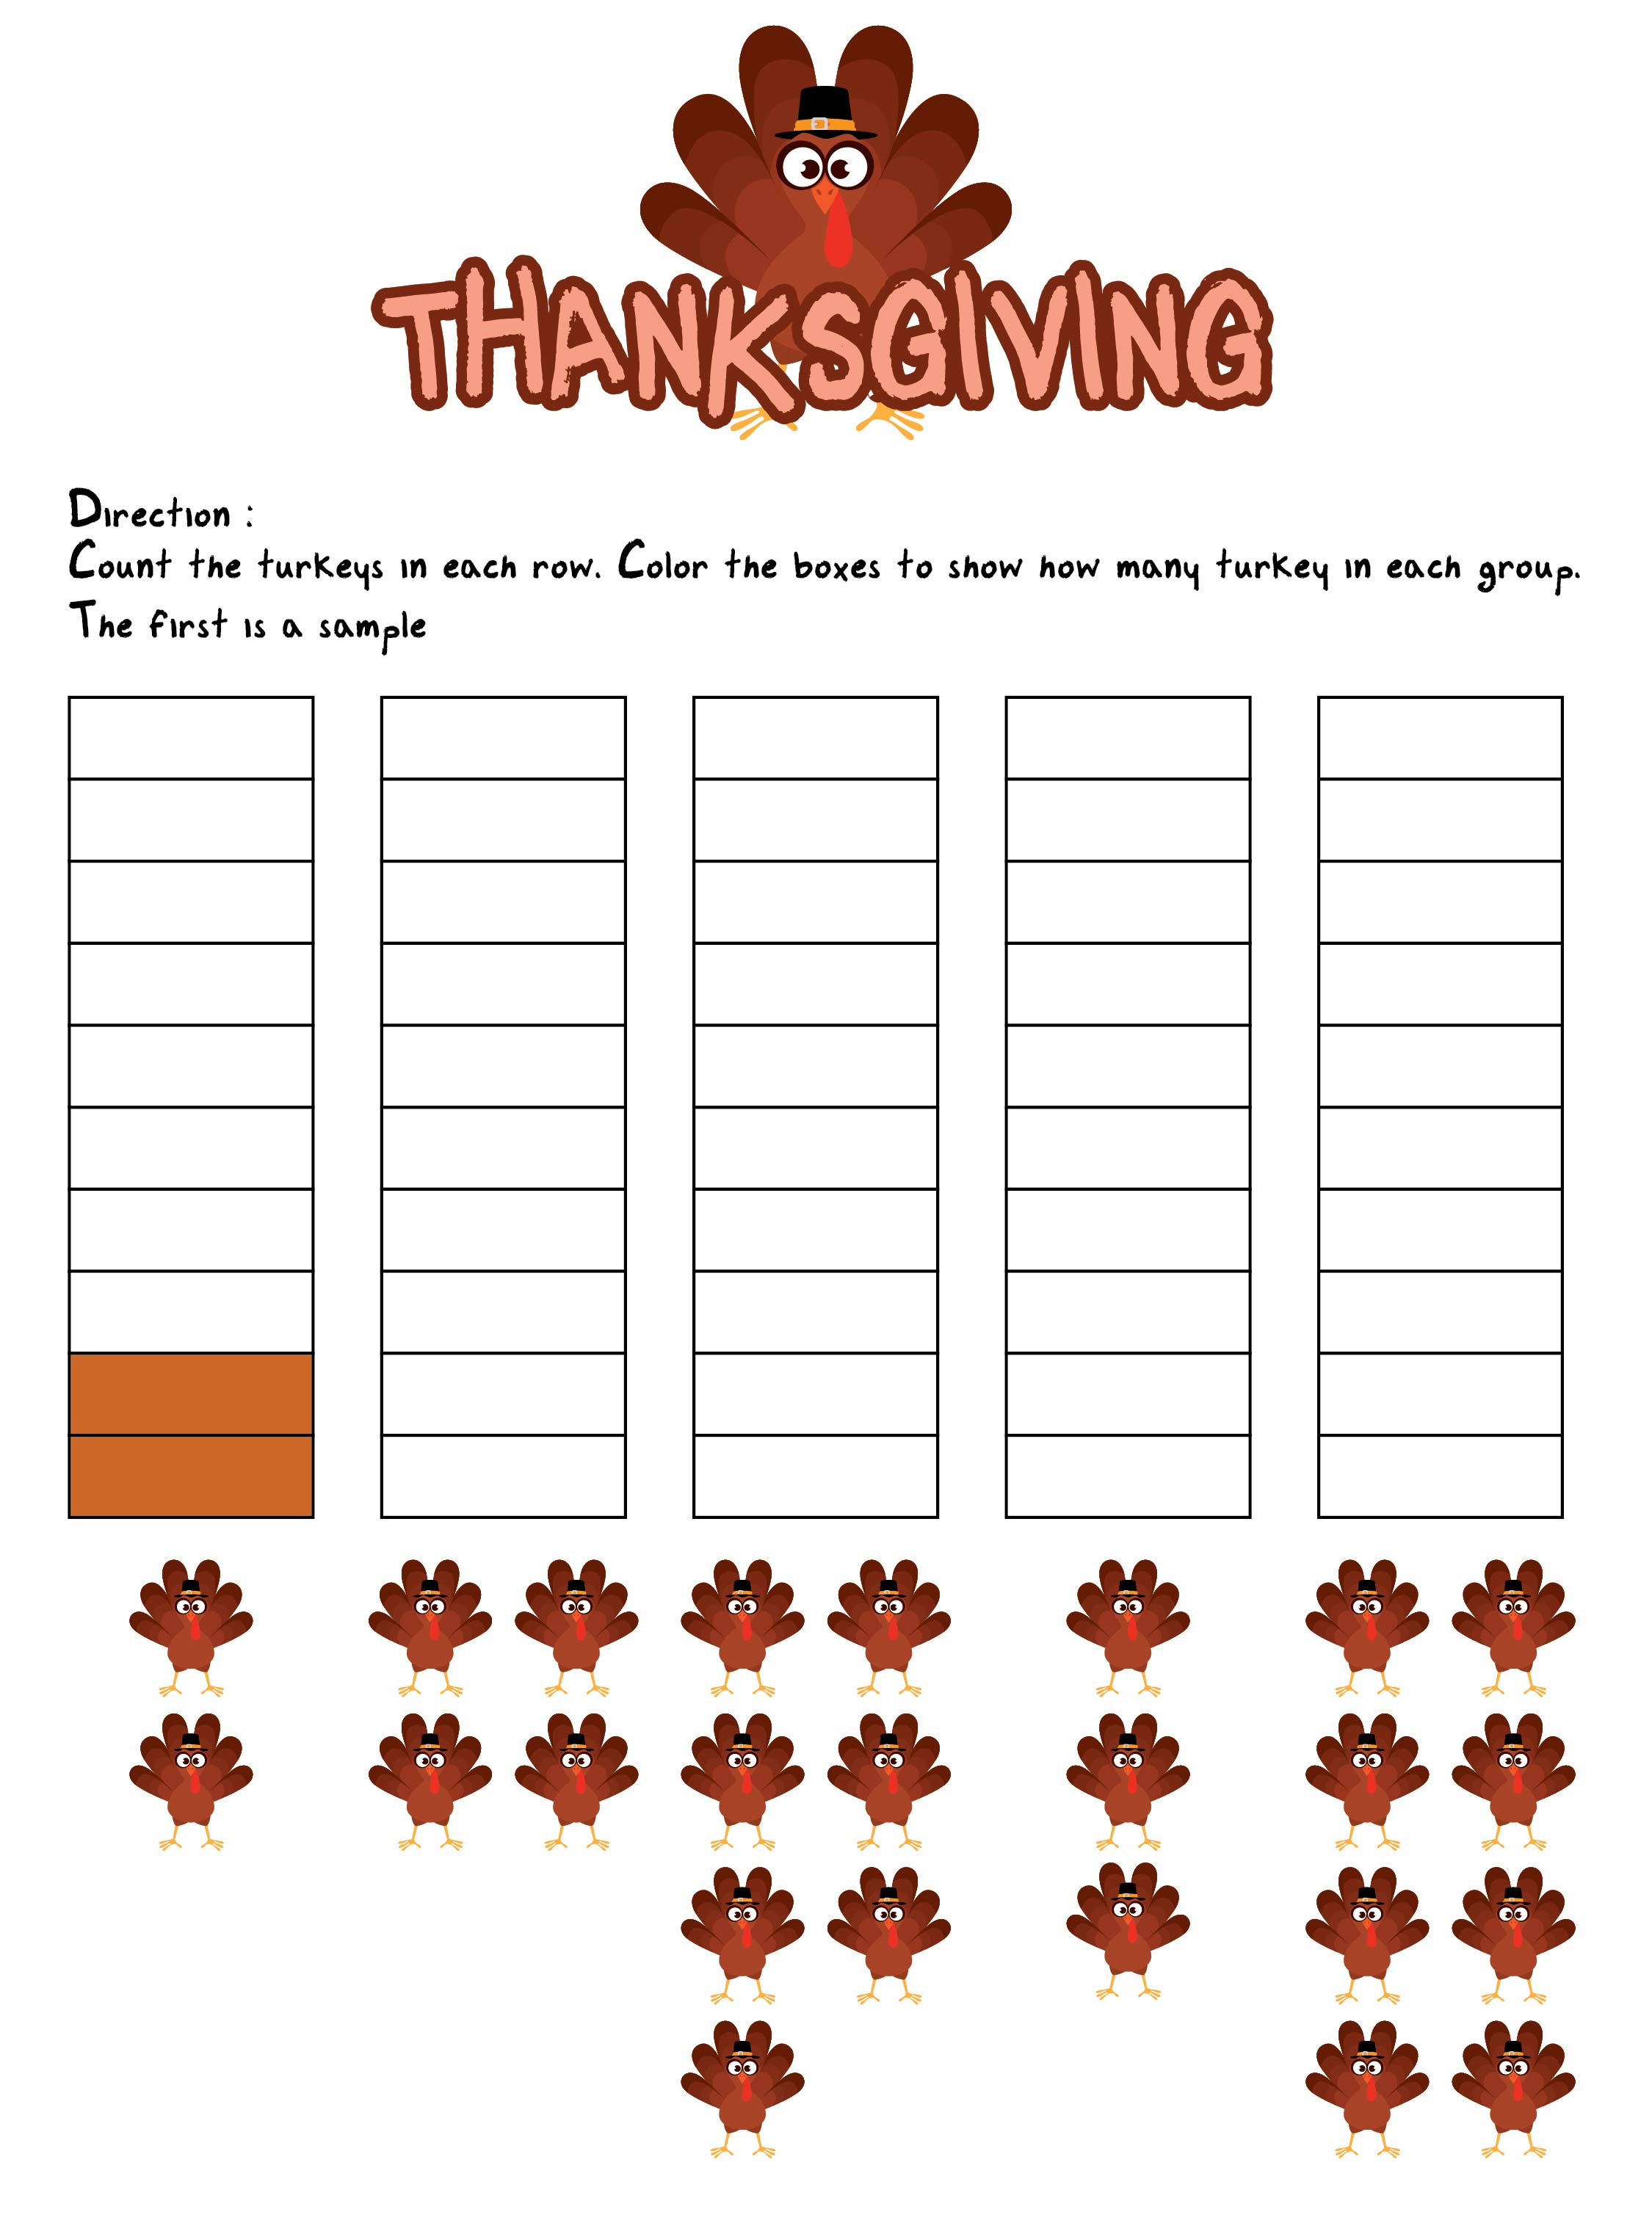 thanksgiving-printable-images-gallery-category-page-3-printablee